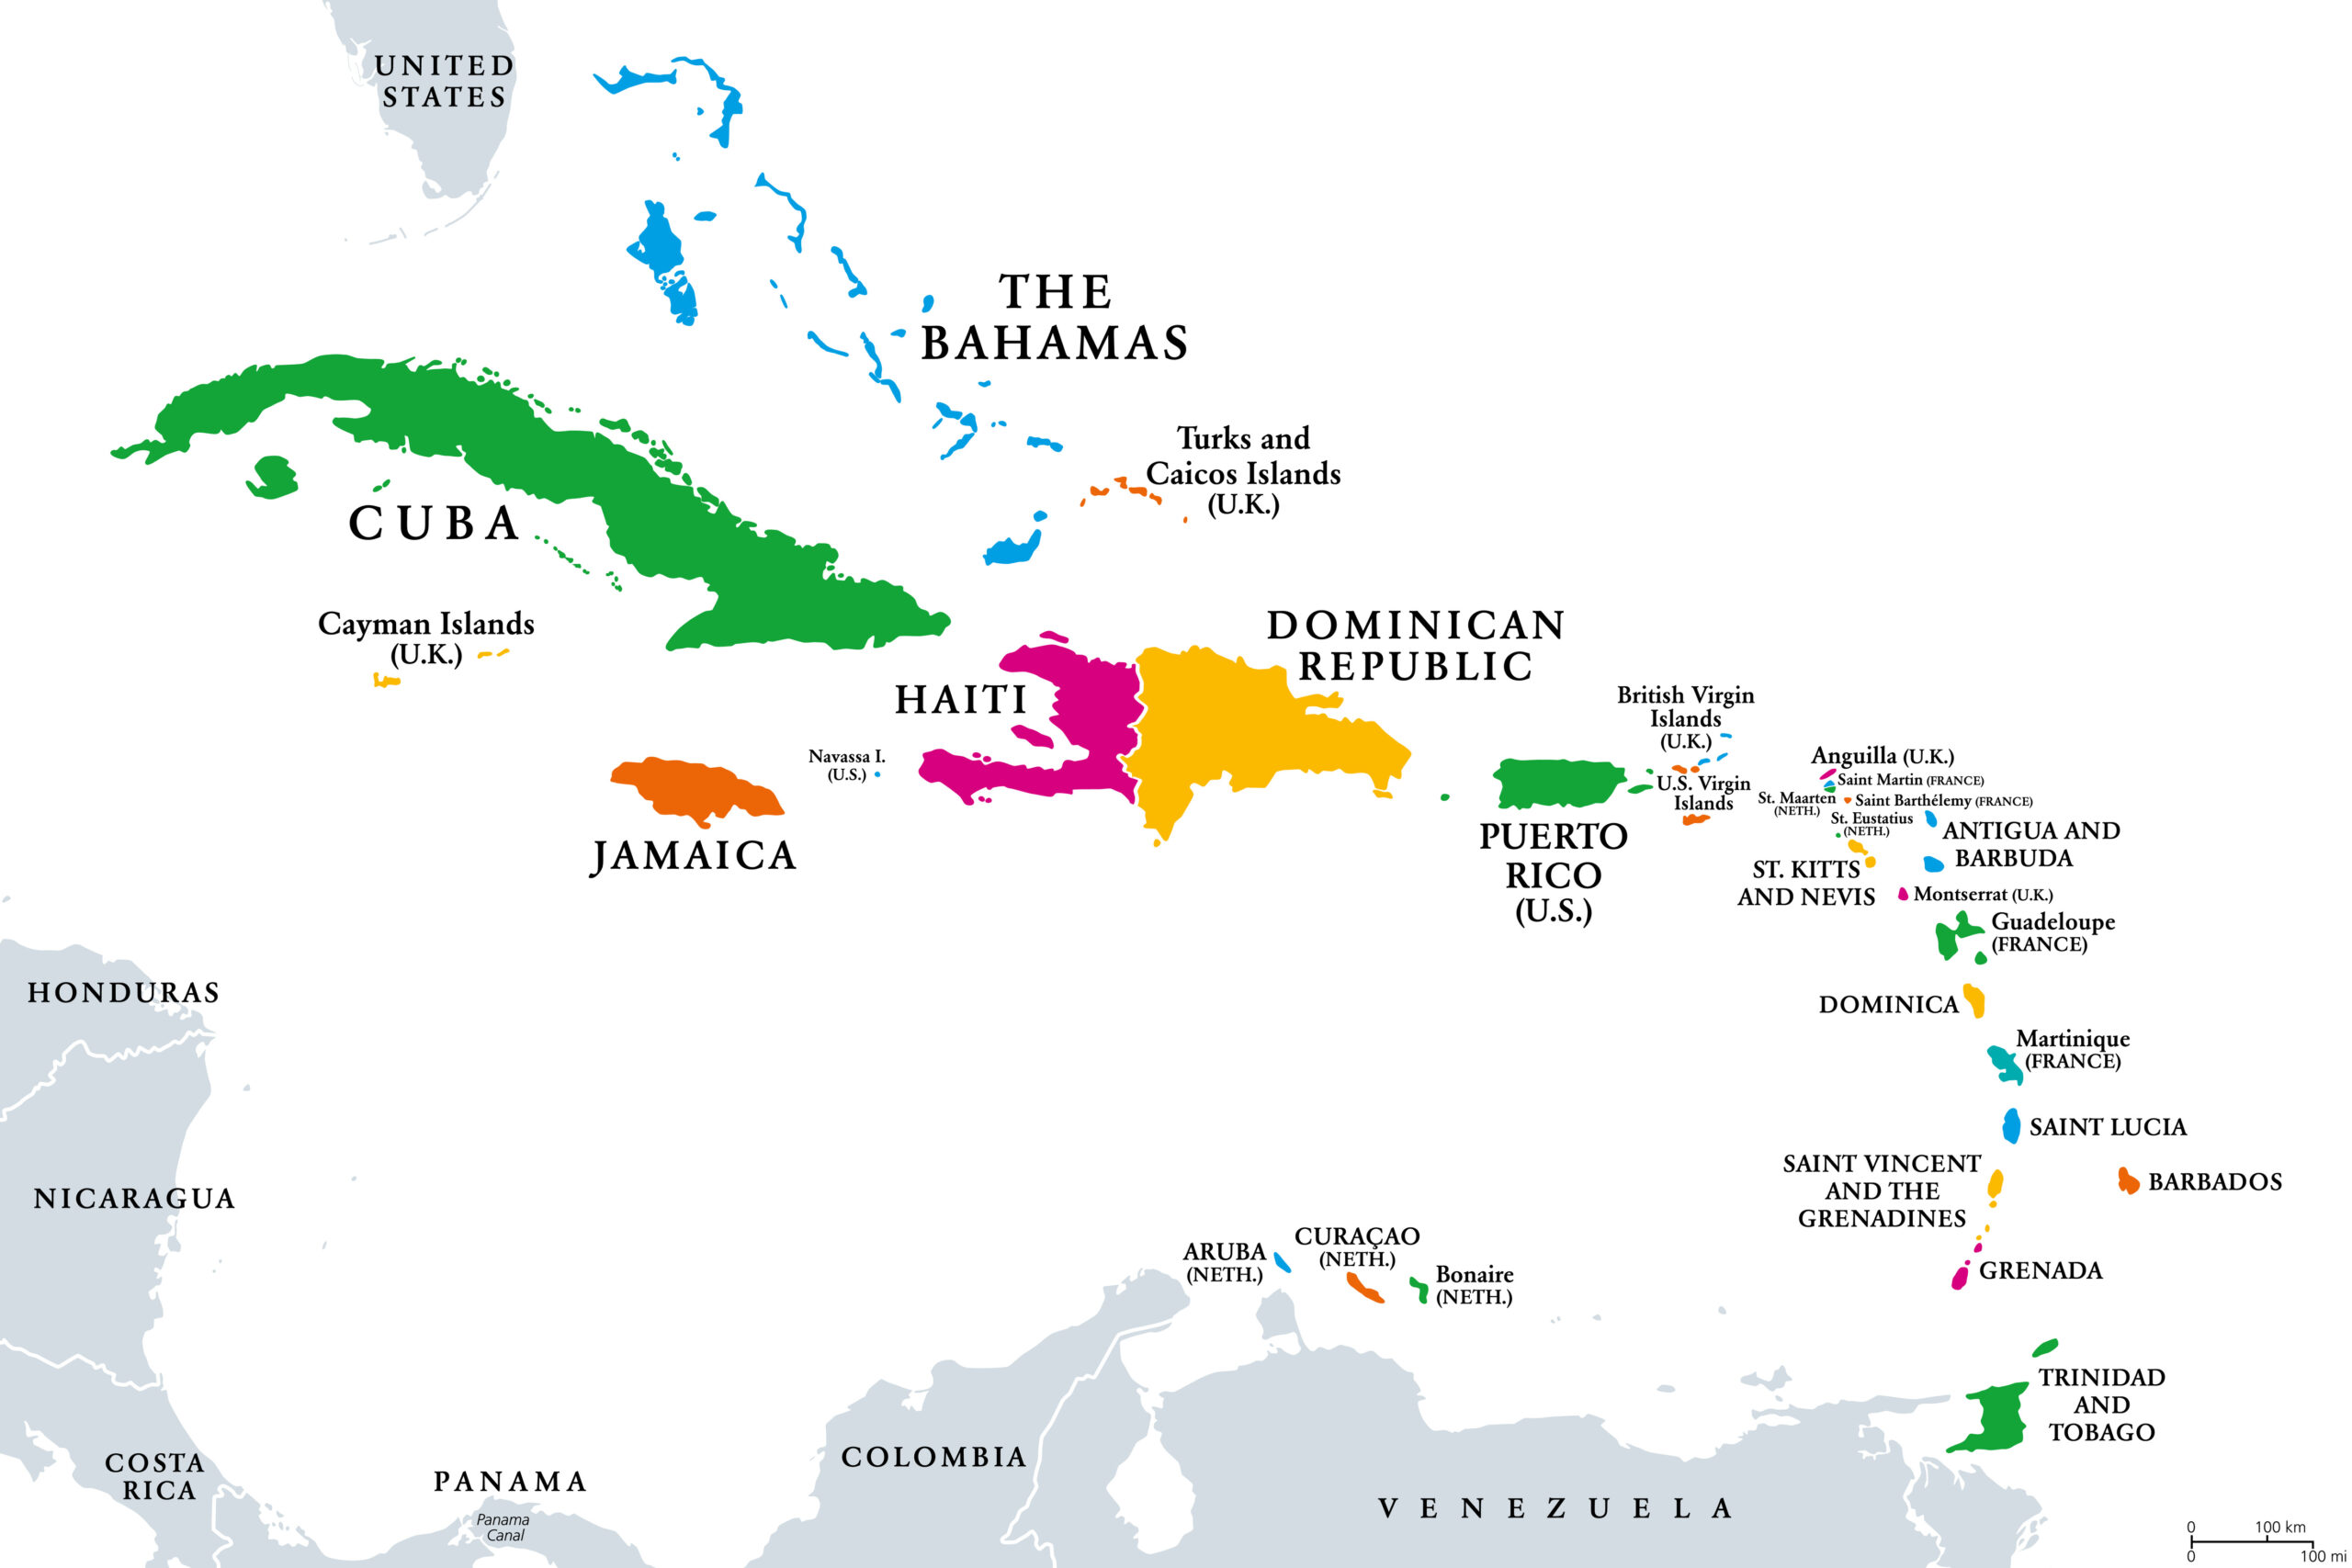 

The West Indies is an informal term for the archipelago in the northern Atlantic between North America and South America, comprising the Greater Antilles, the Lesser Antilles, and the Bahamas. Islands mentioned in this issue: Puerto Rico, Barbados, and Antigua.